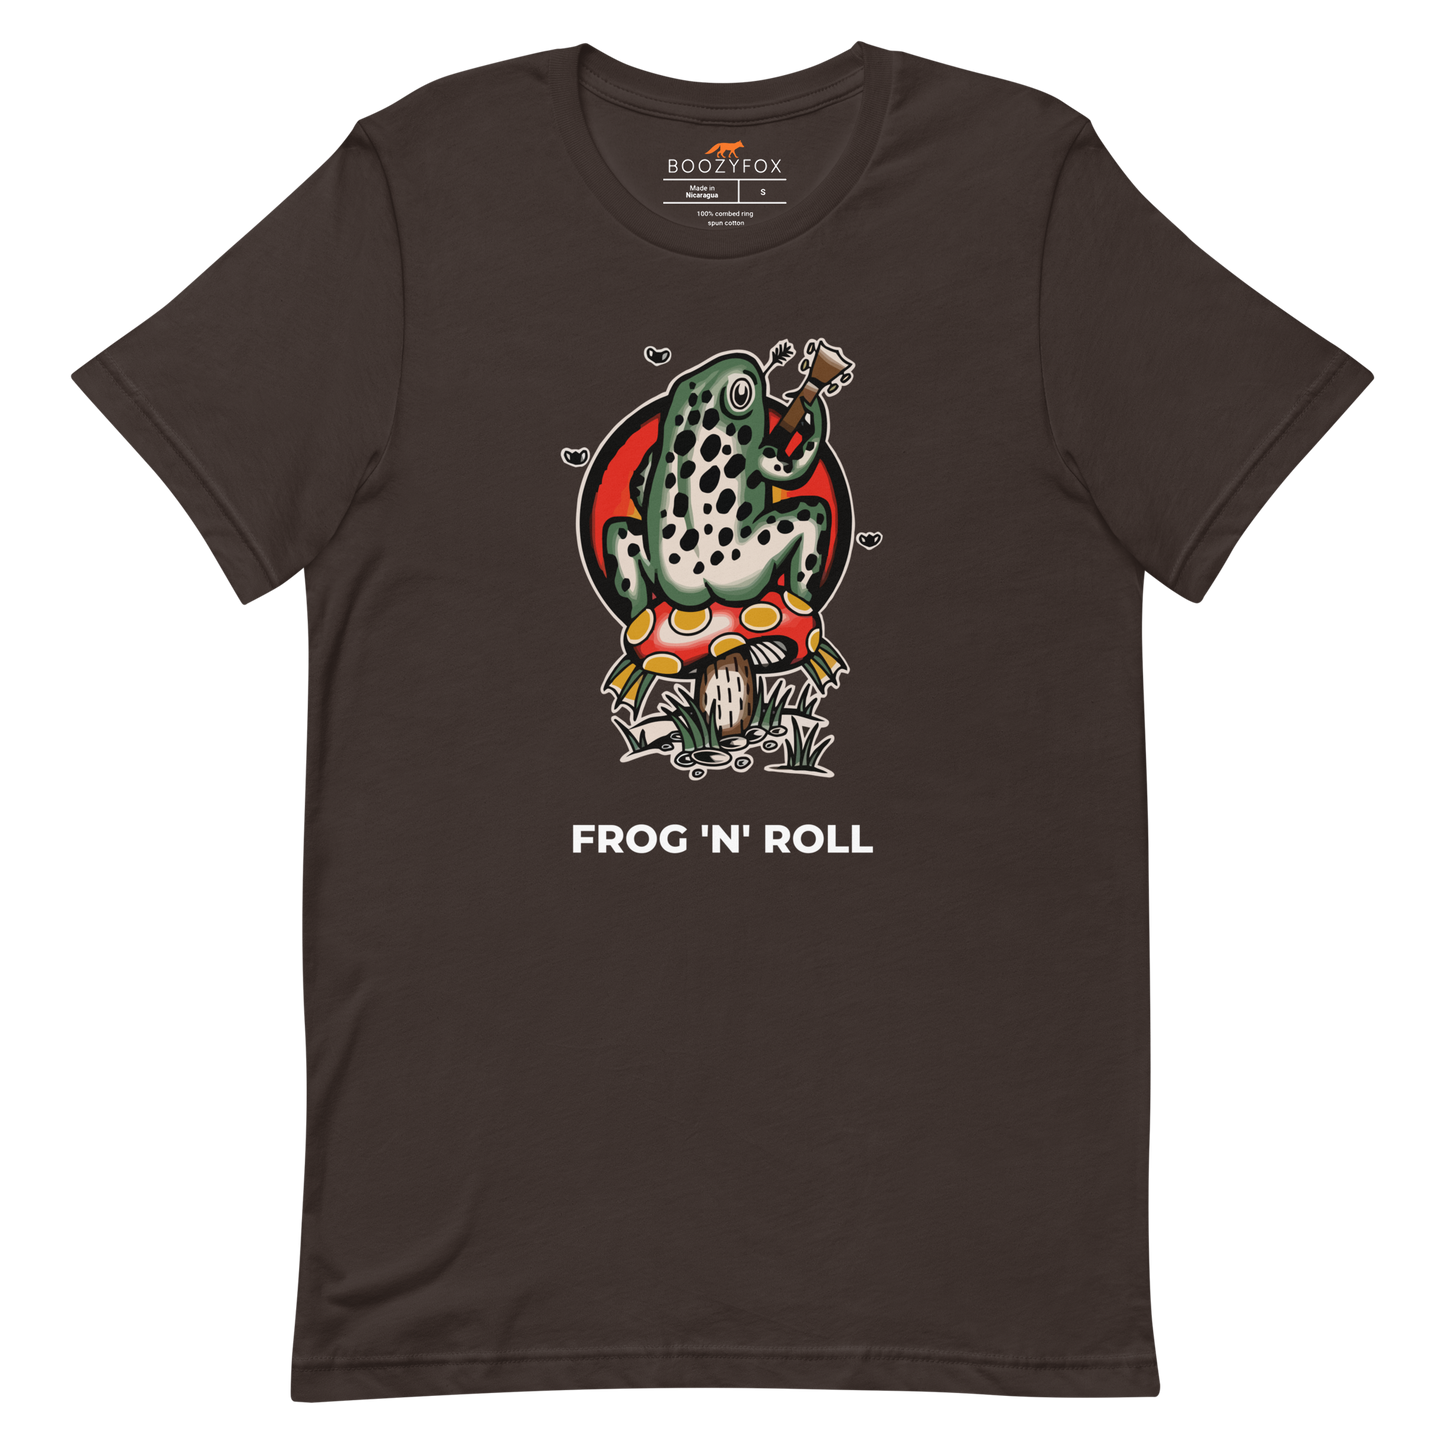 Brown Premium Frog Tee featuring a funny Frog 'n' Roll graphic on the chest - Funny Graphic Frog Tees - Boozy Fox